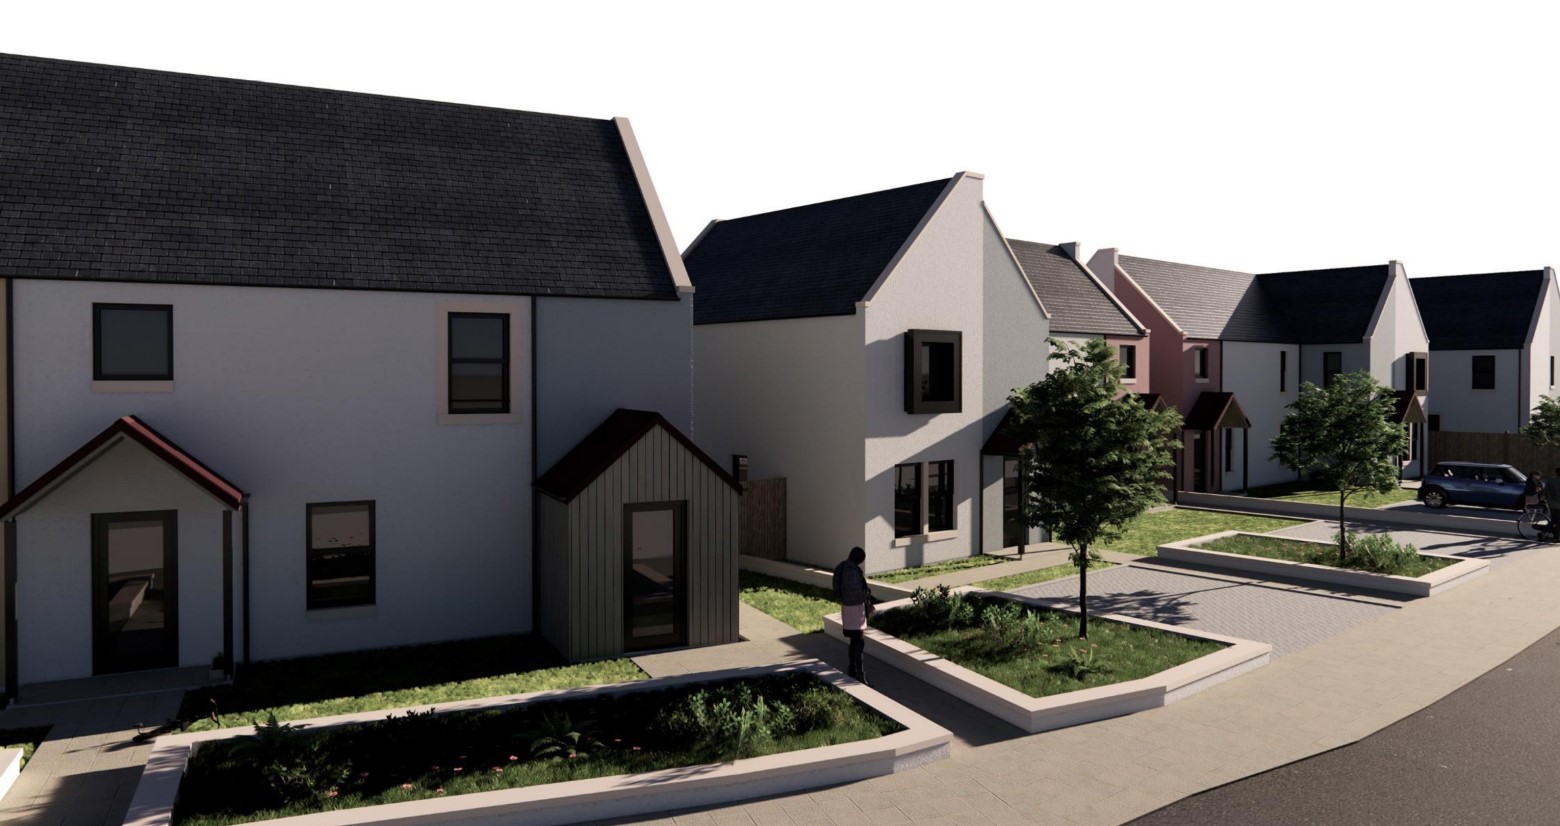 Highland Council submits plans for 117 new homes in Dingwall